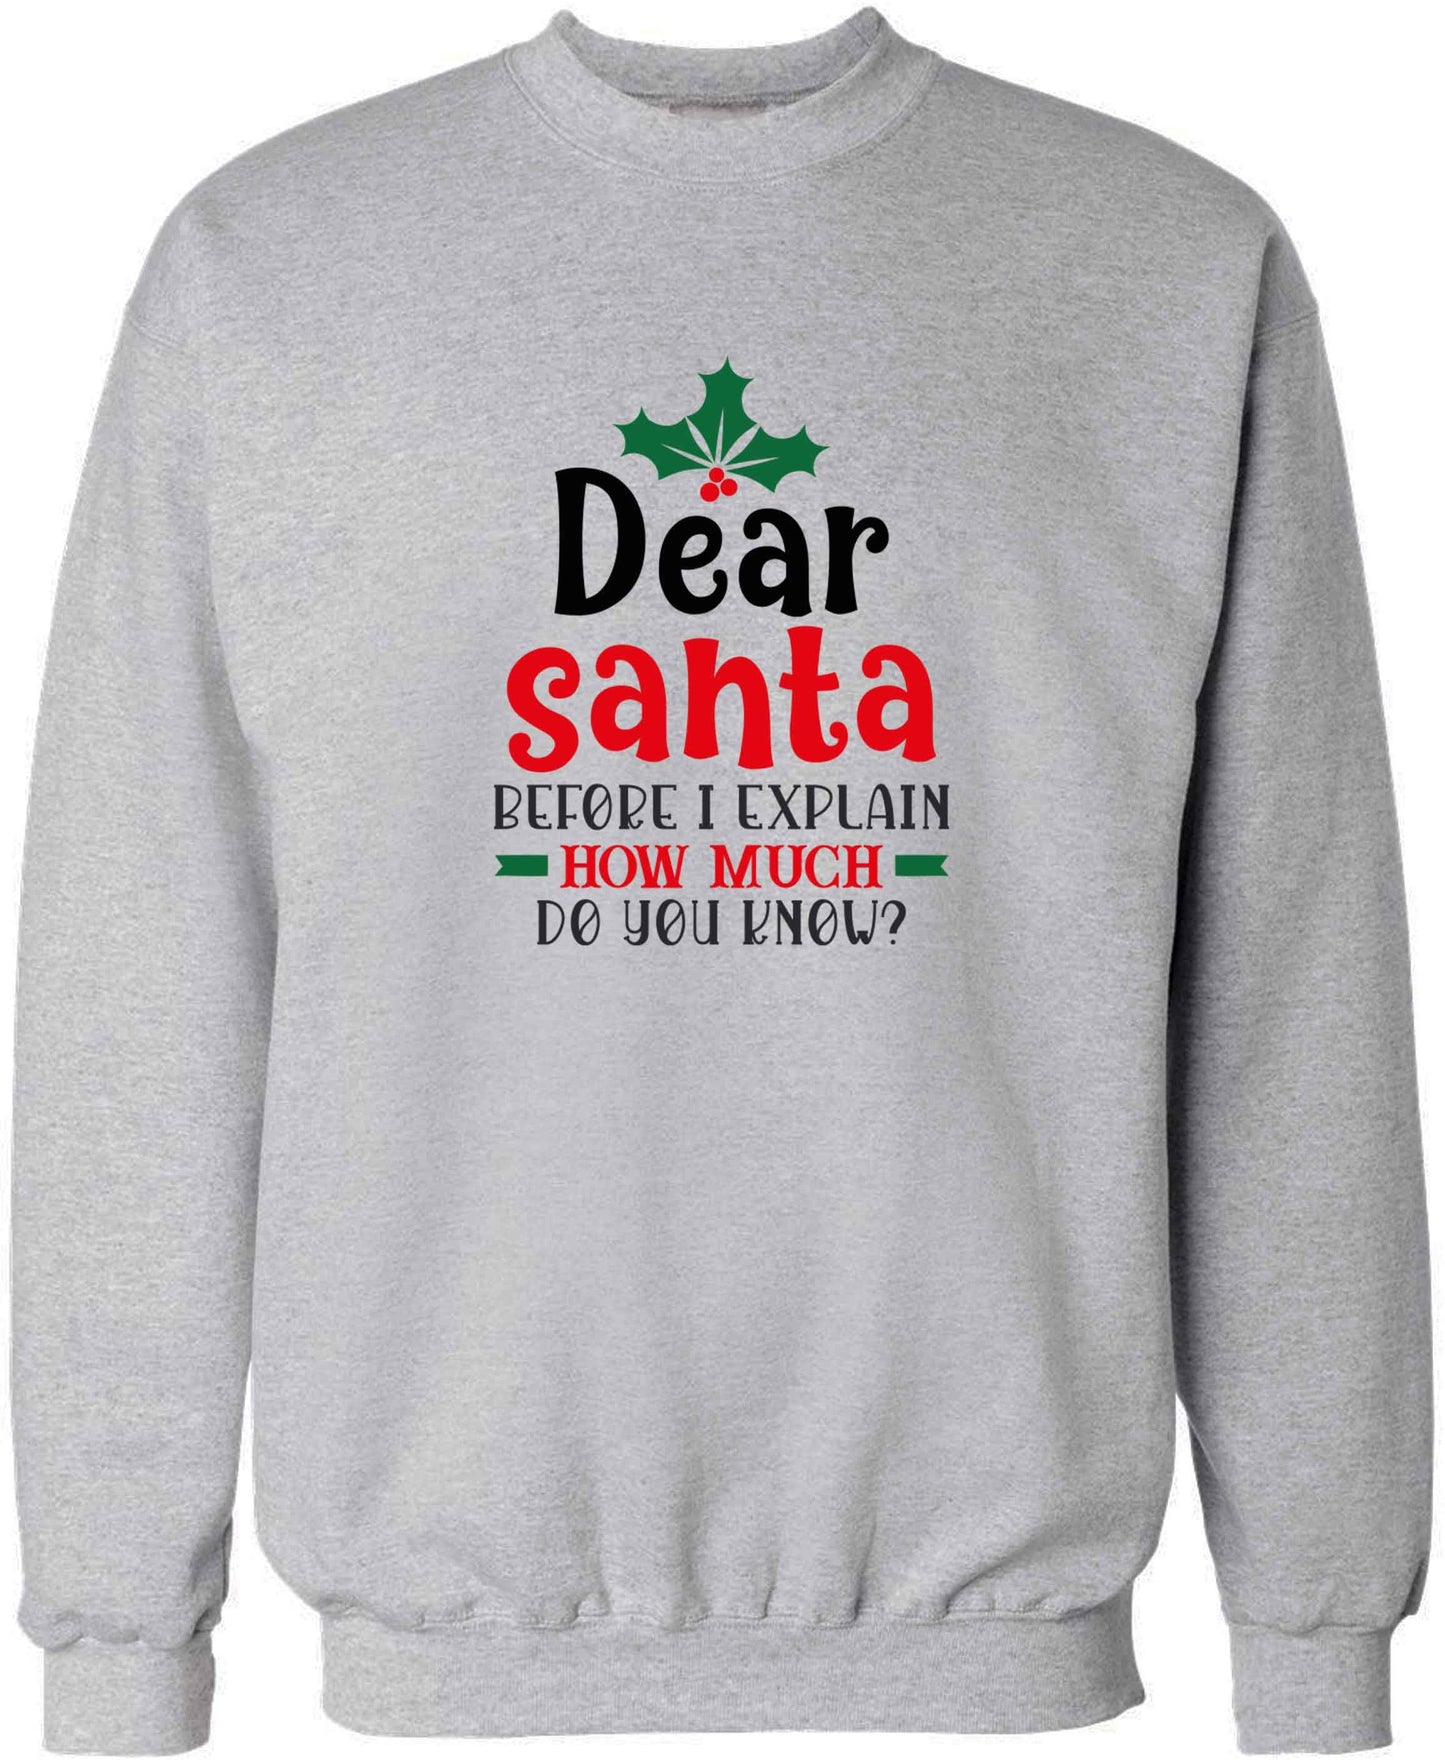 Santa before I explain how much do you know? adult's unisex grey sweater 2XL